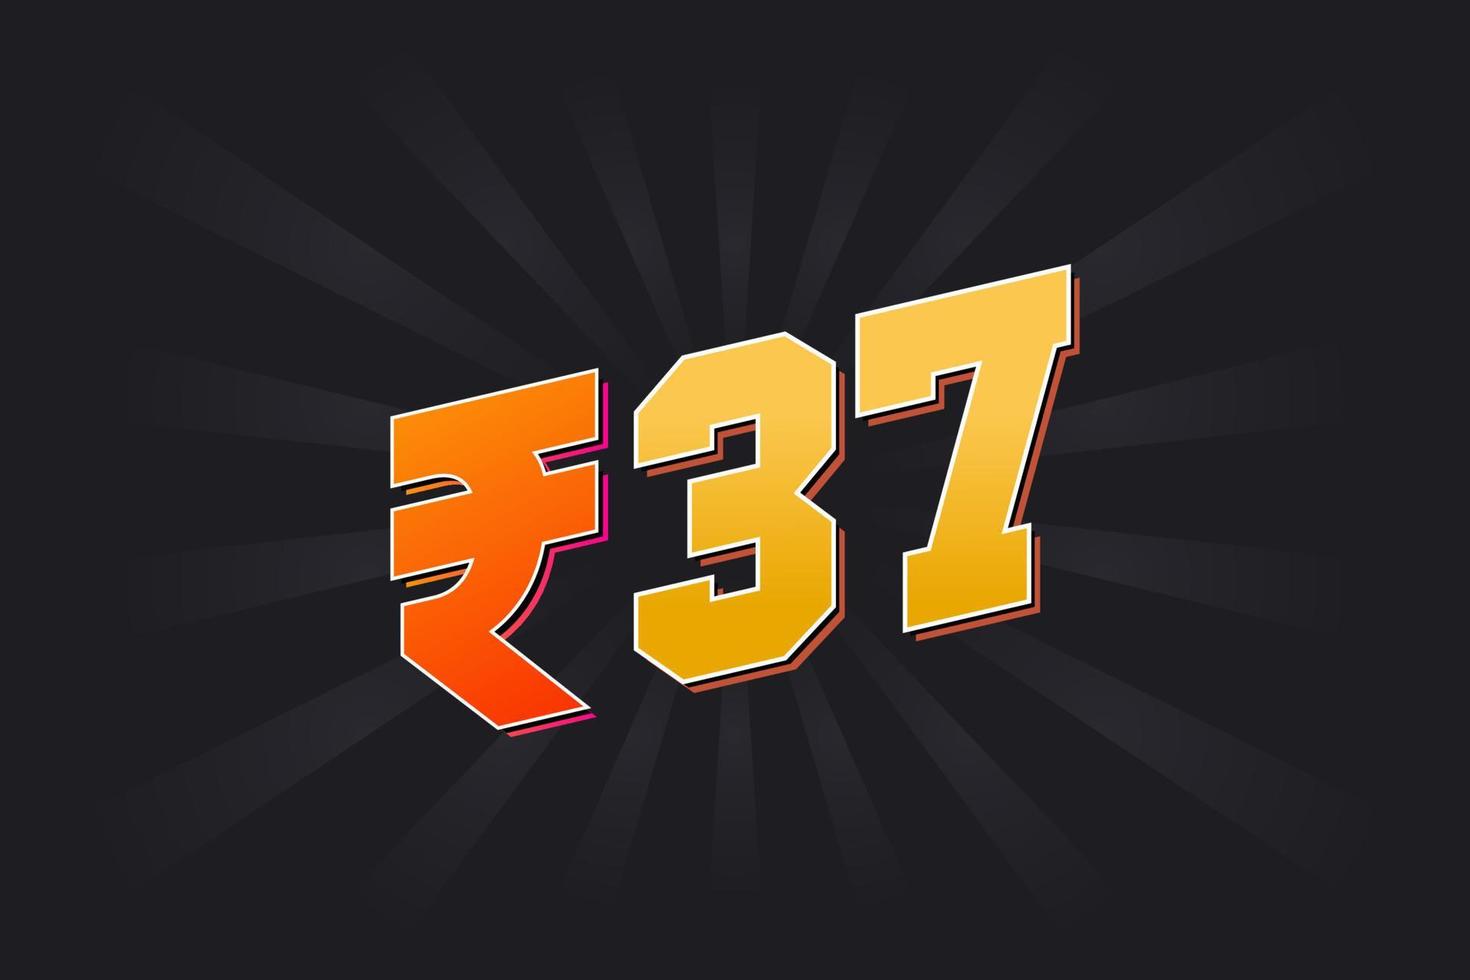 37 Indian Rupee vector currency image. 37 Rupee symbol bold text vector illustration